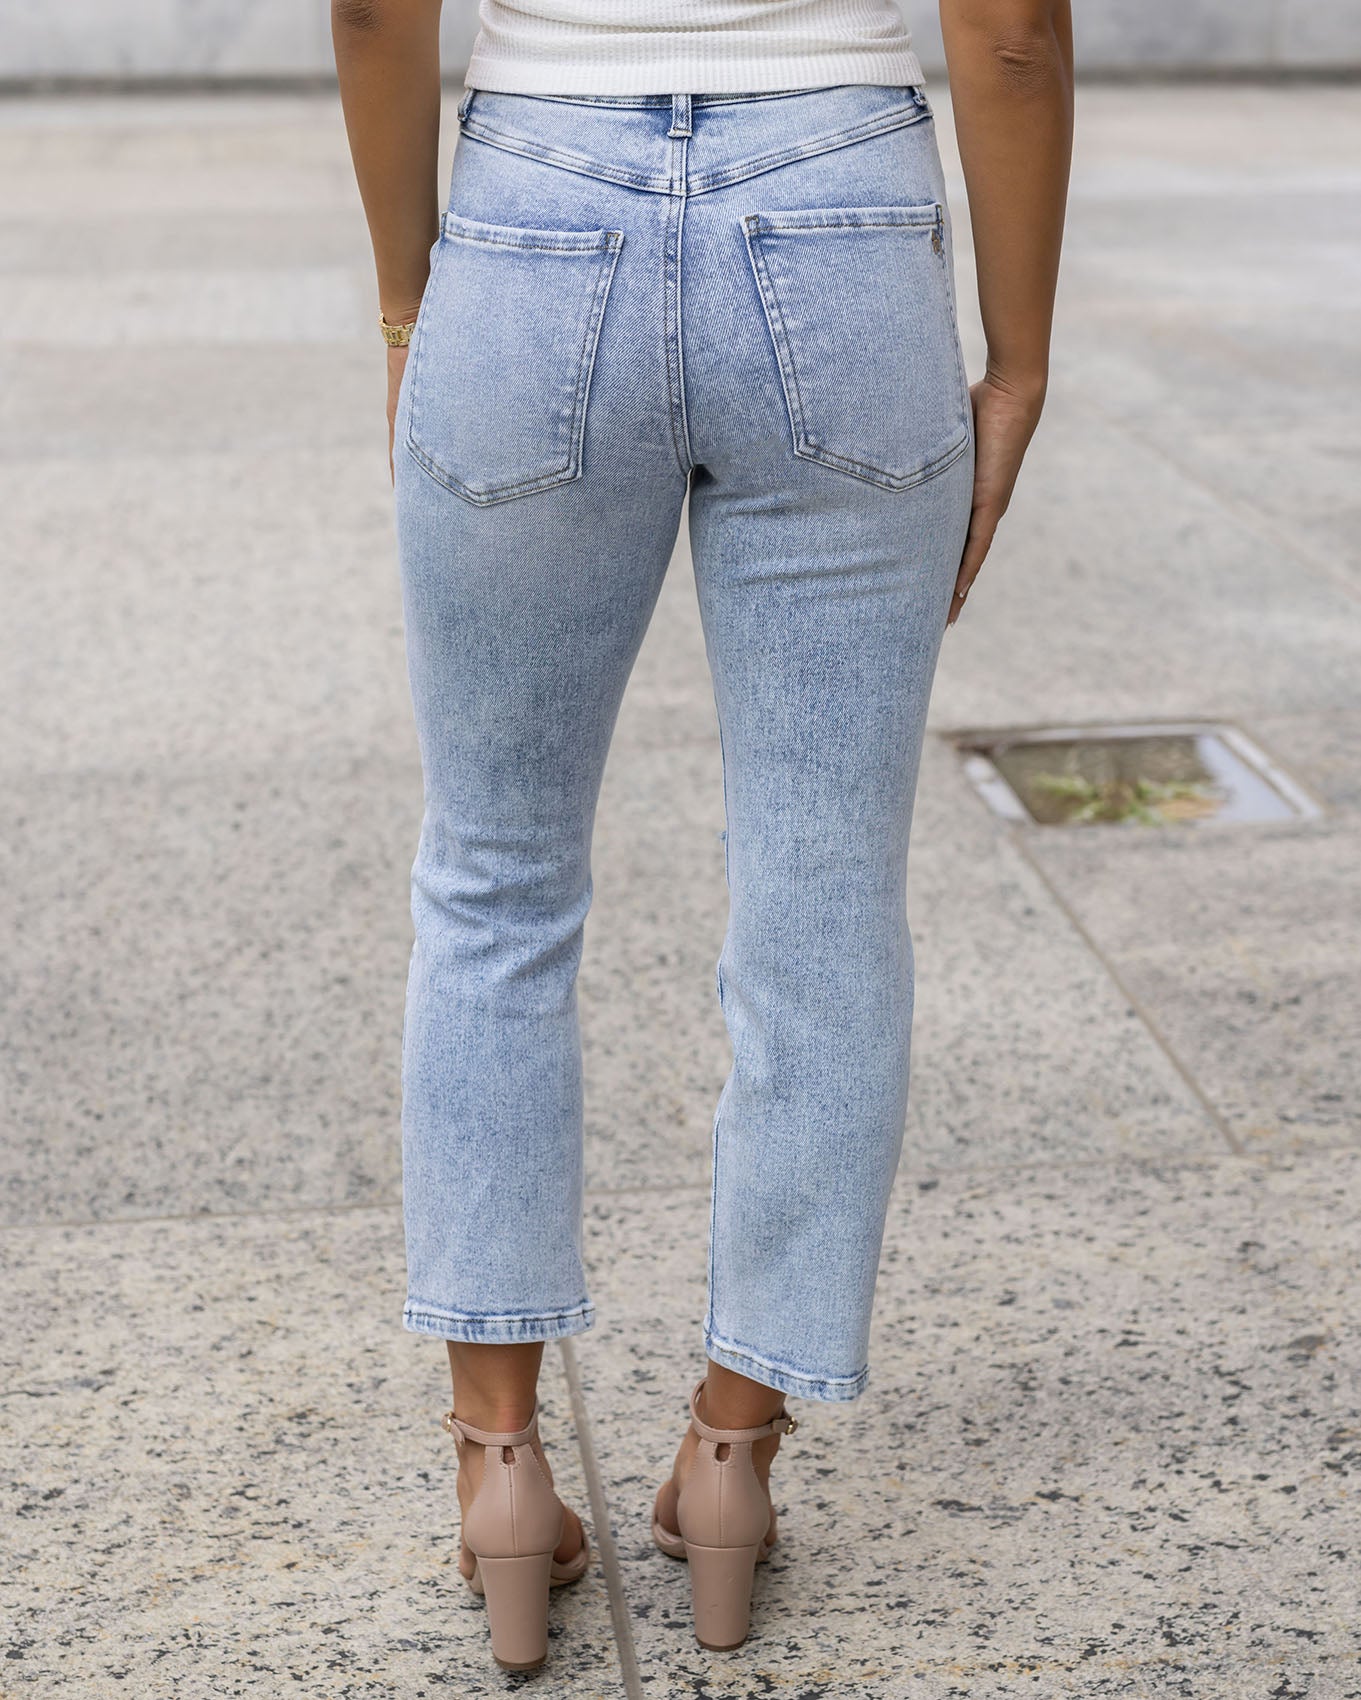 Premium Denim High Waisted Mom Jeans in Distressed Light Mid